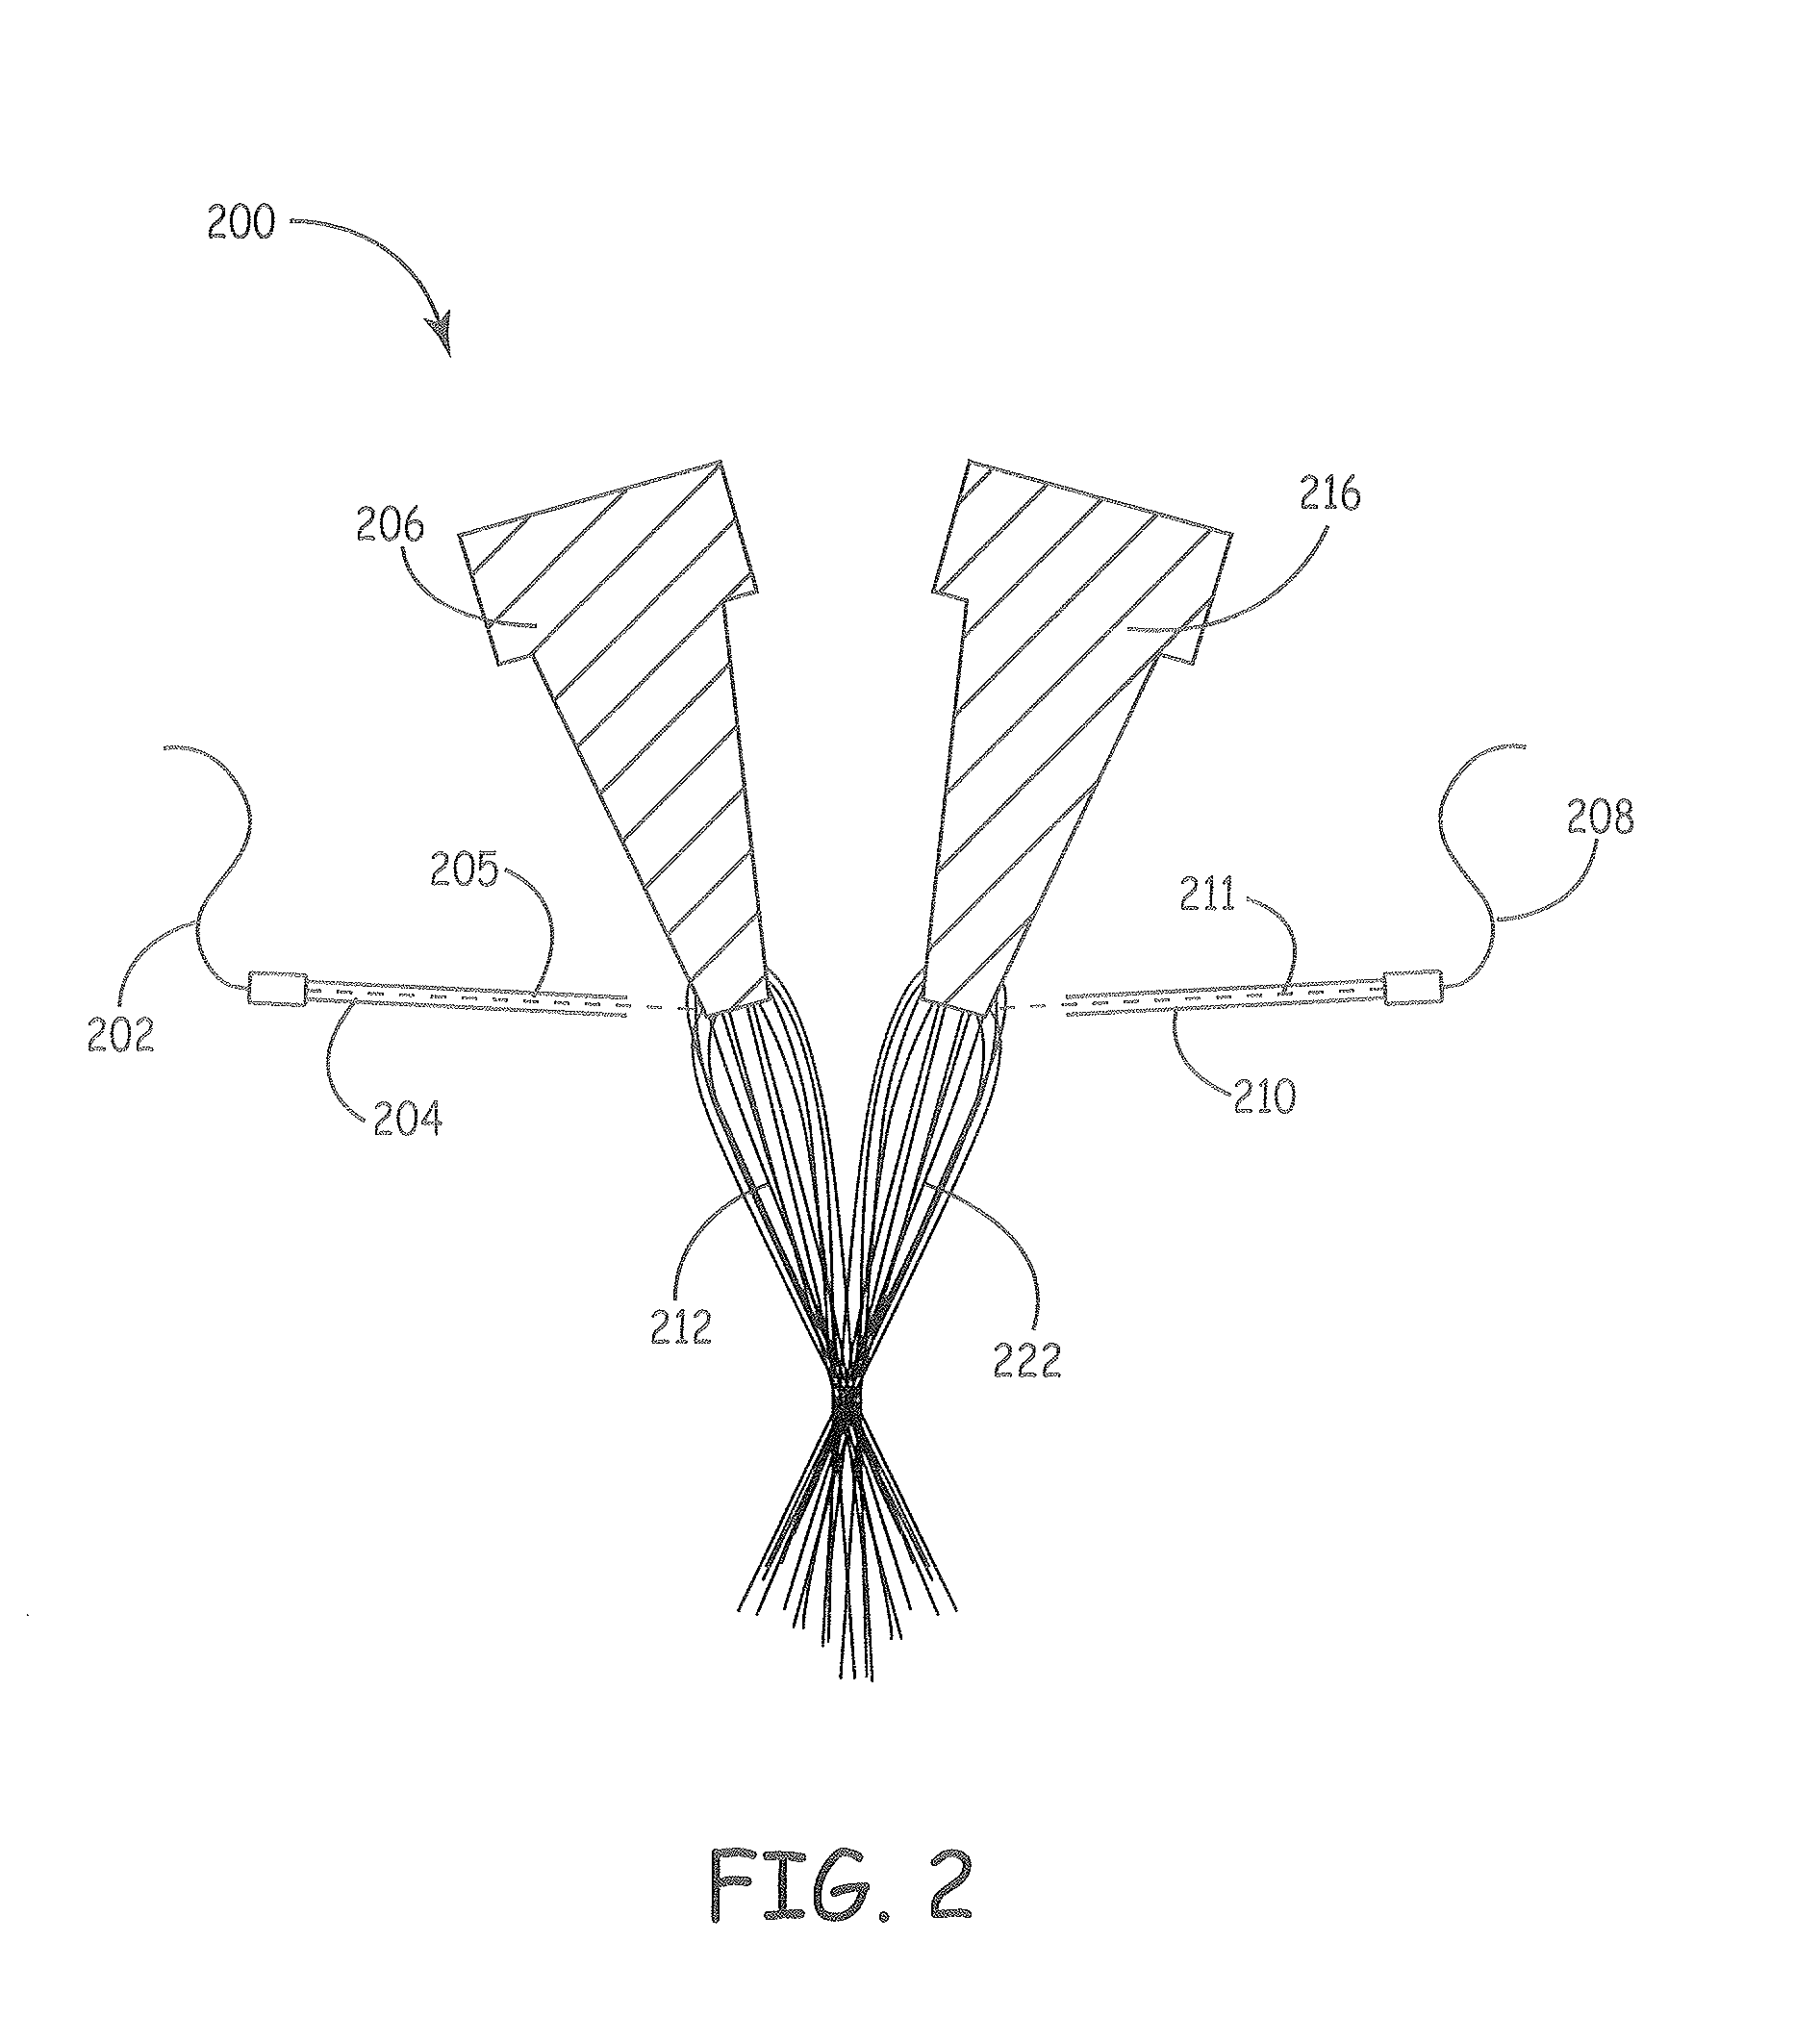 Polyelectrolyte media for bioactive agent delivery